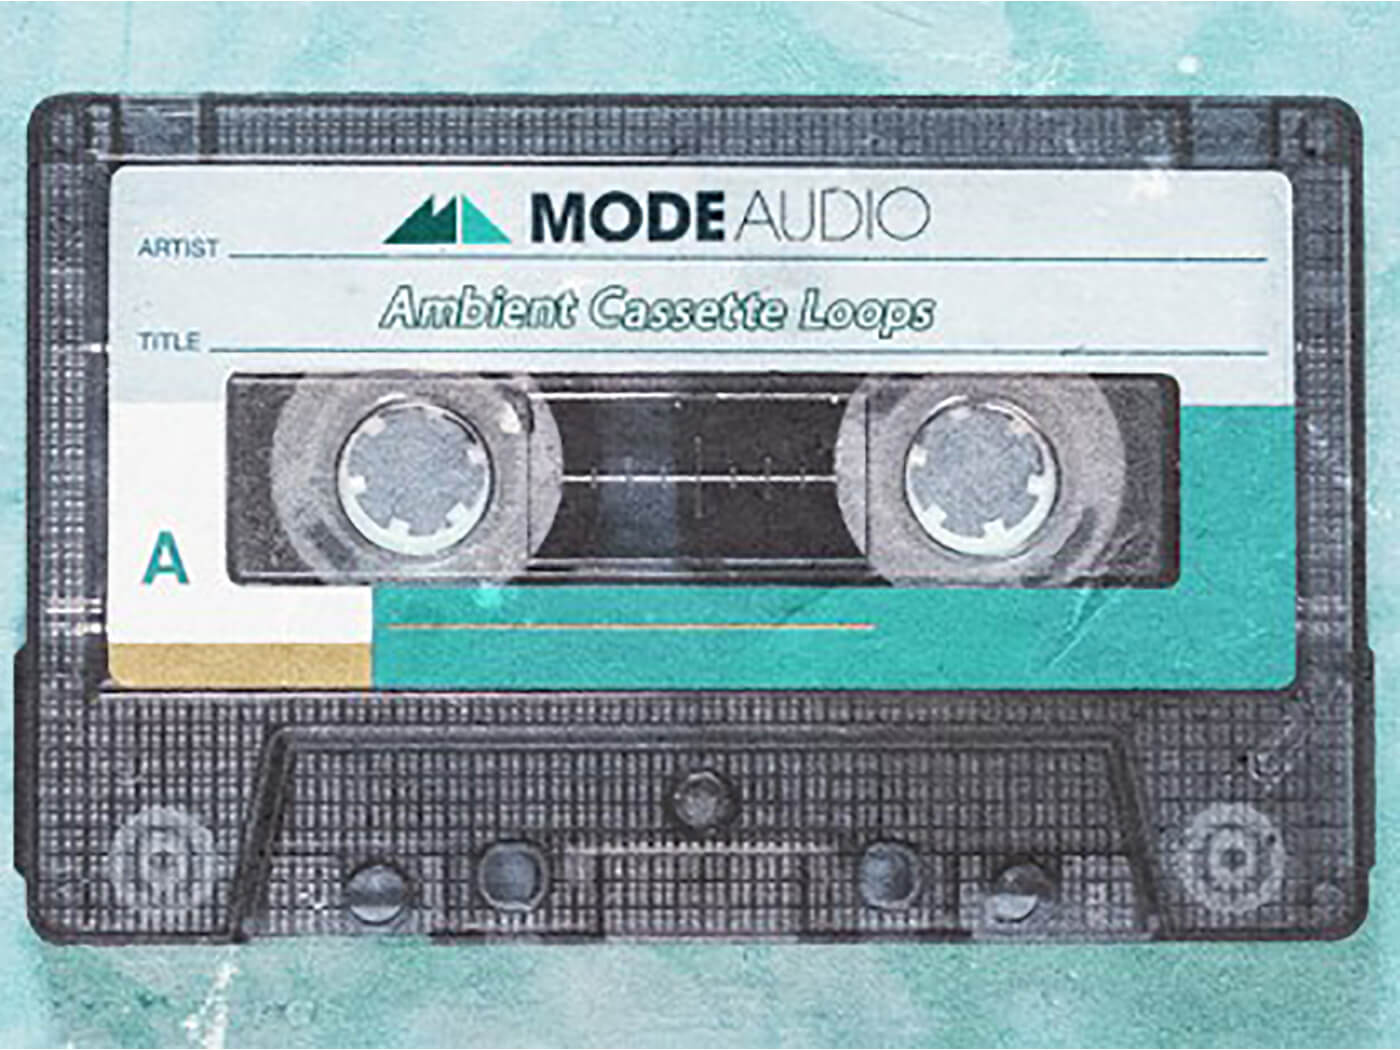 ModeAudio - Free Ambient Cassette Loops